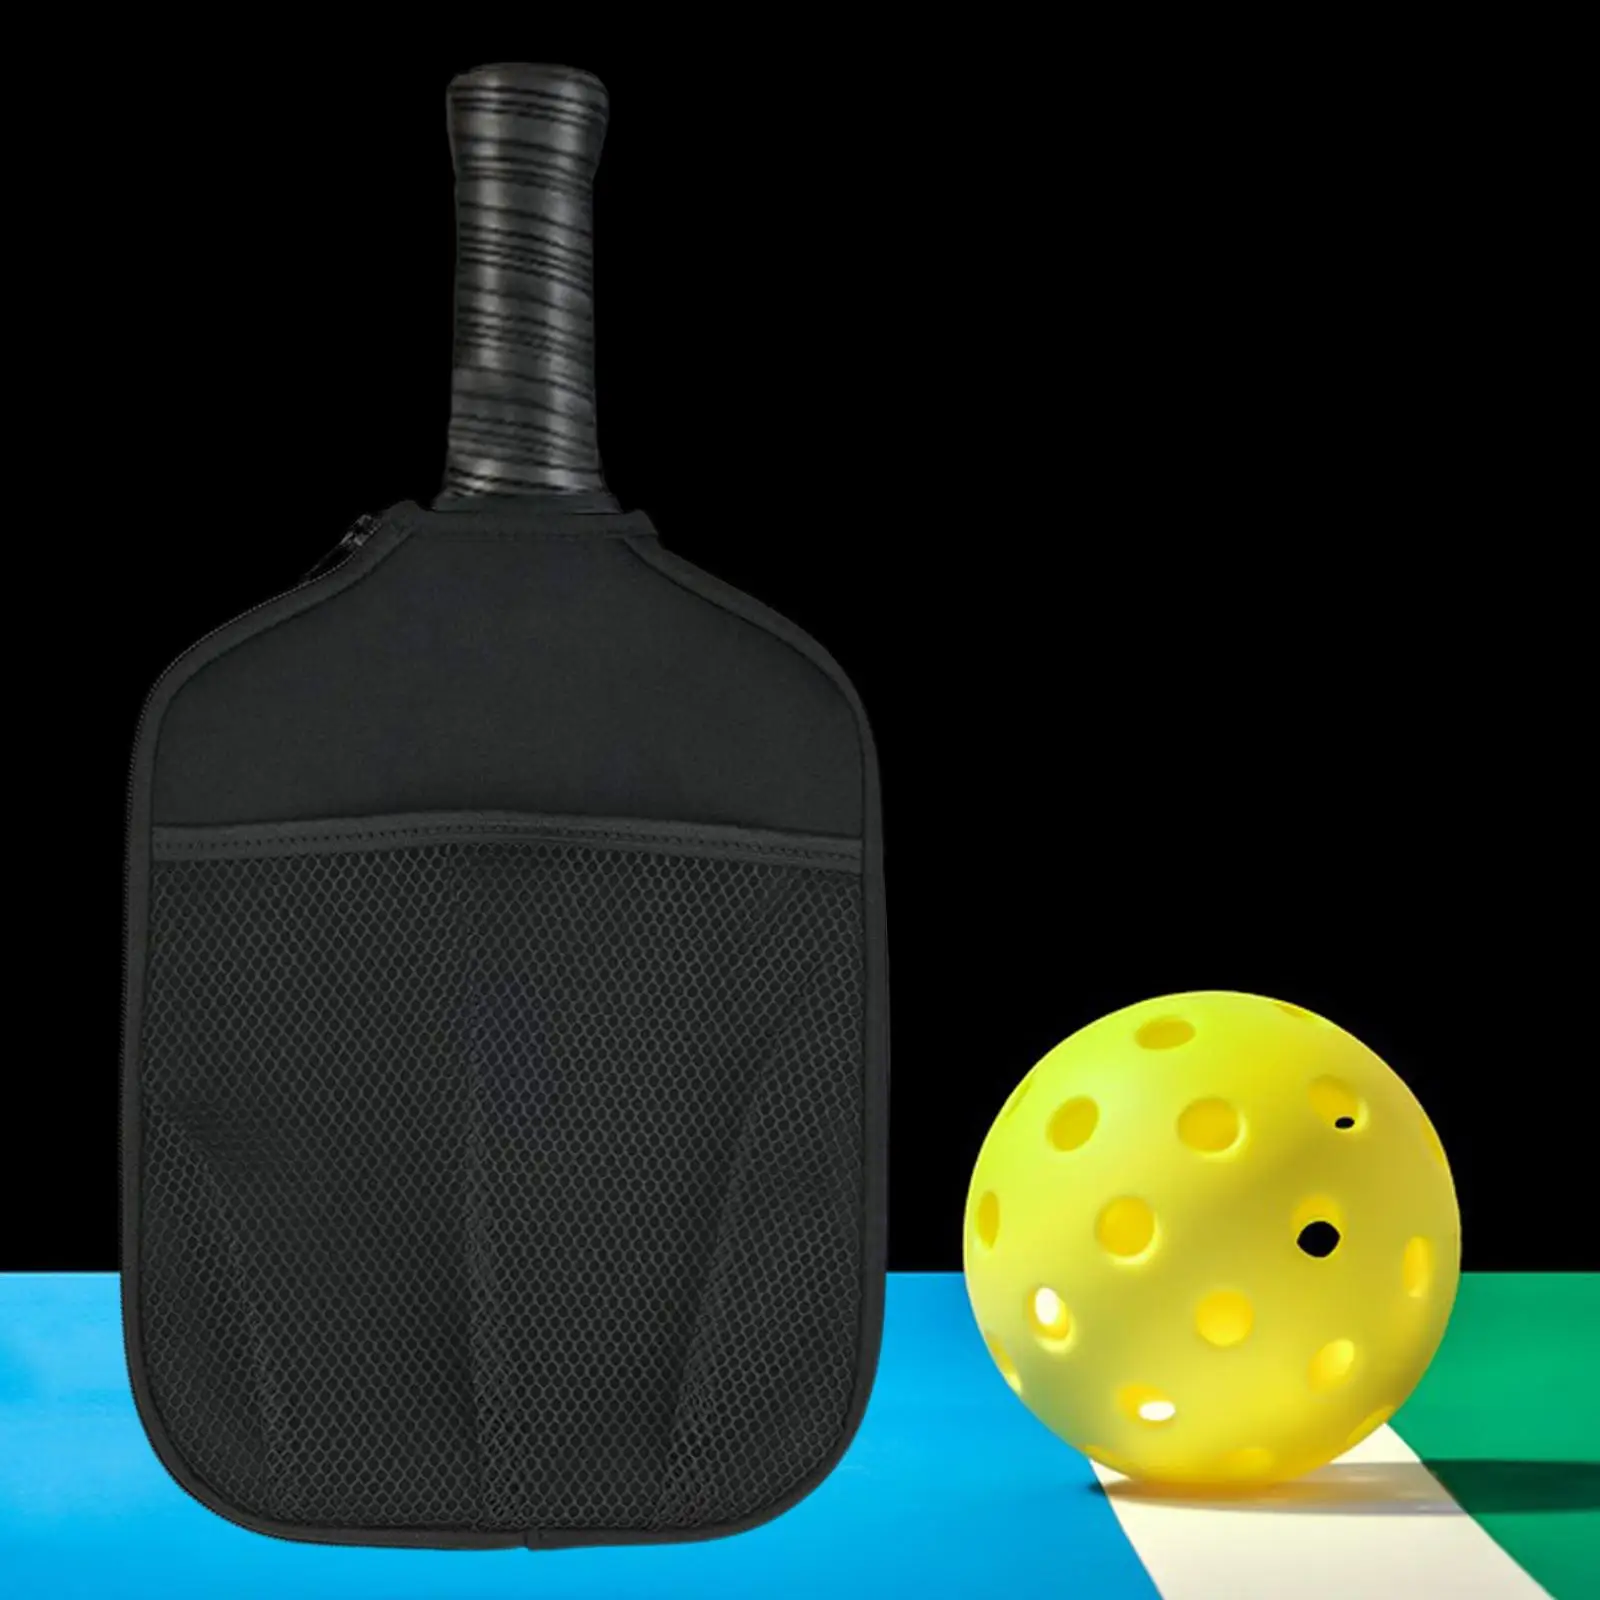 Premium Neoprene Pickleball Paddle Cover Case Zipper Pouch Storage Protective Sleeve Durable Waterproof Sport Accessories